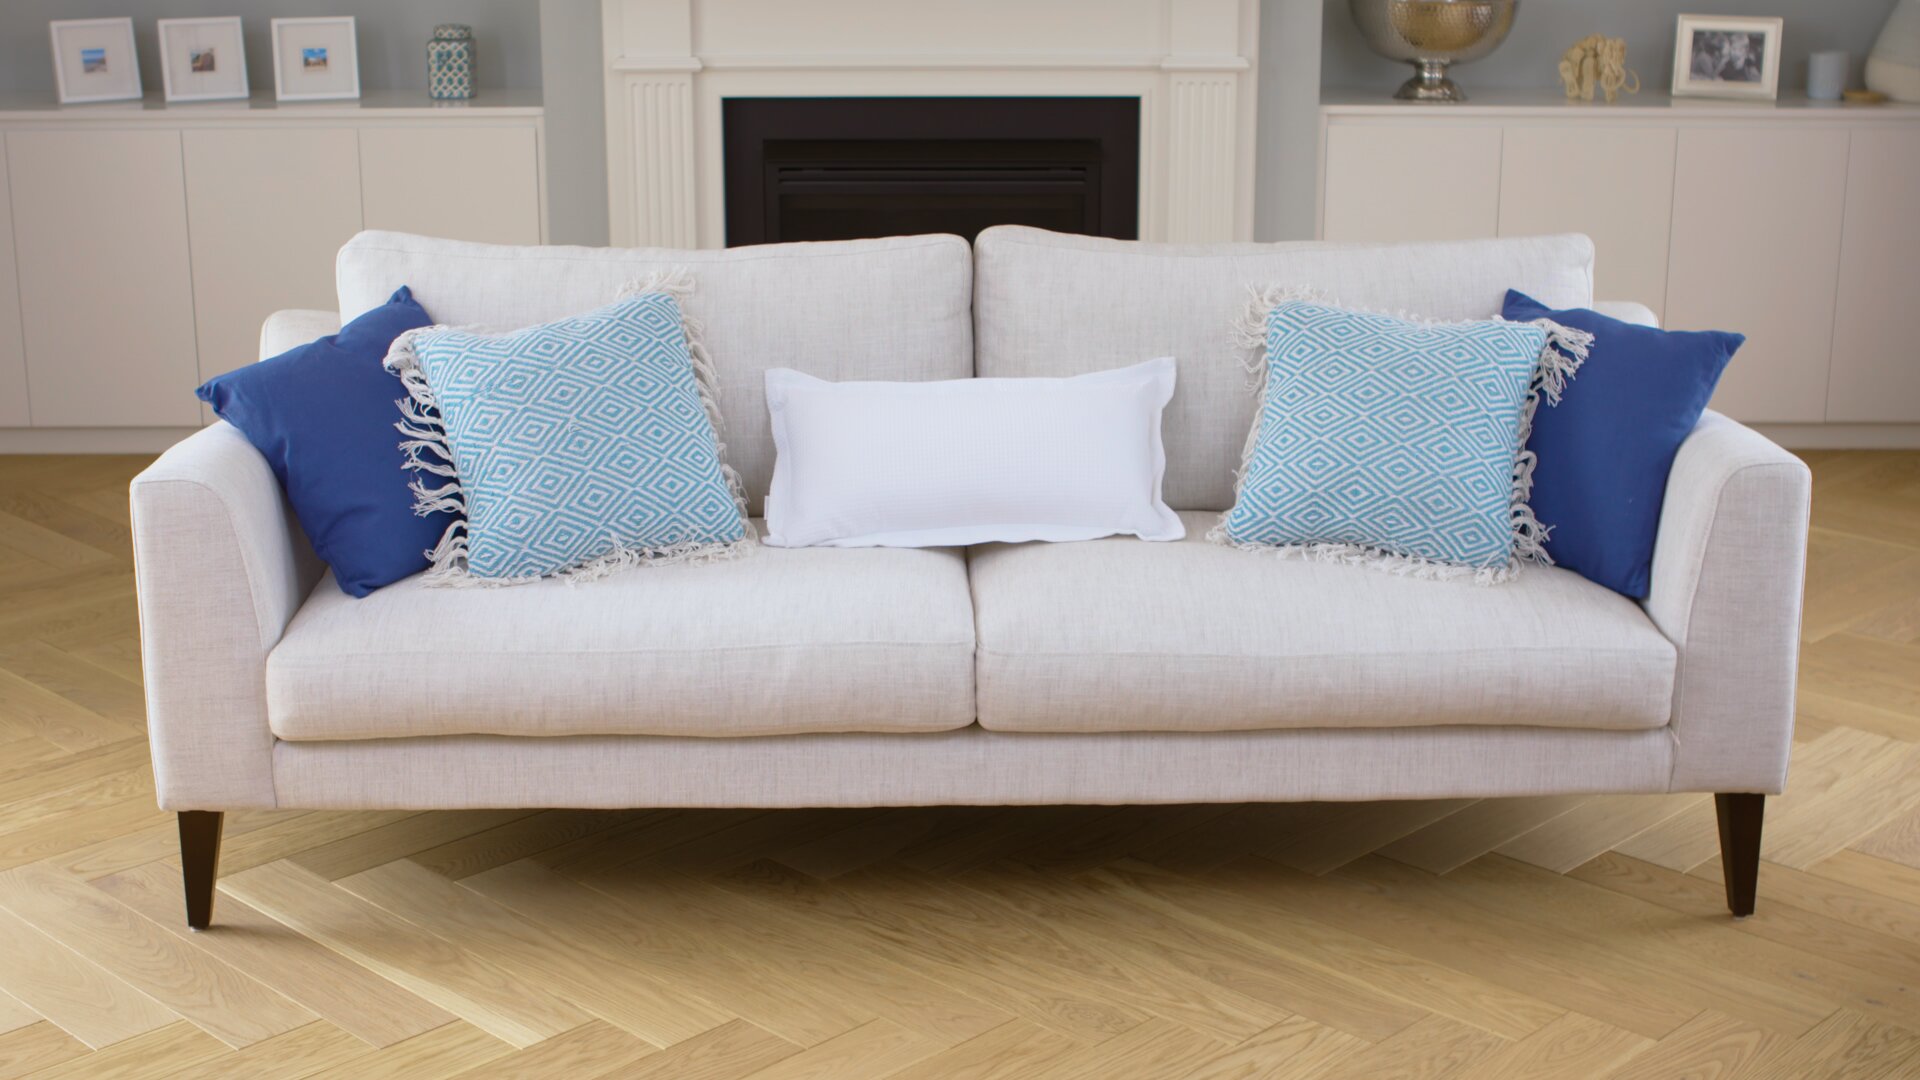 Get Comfortable With Our Extensive Range Of Cushions